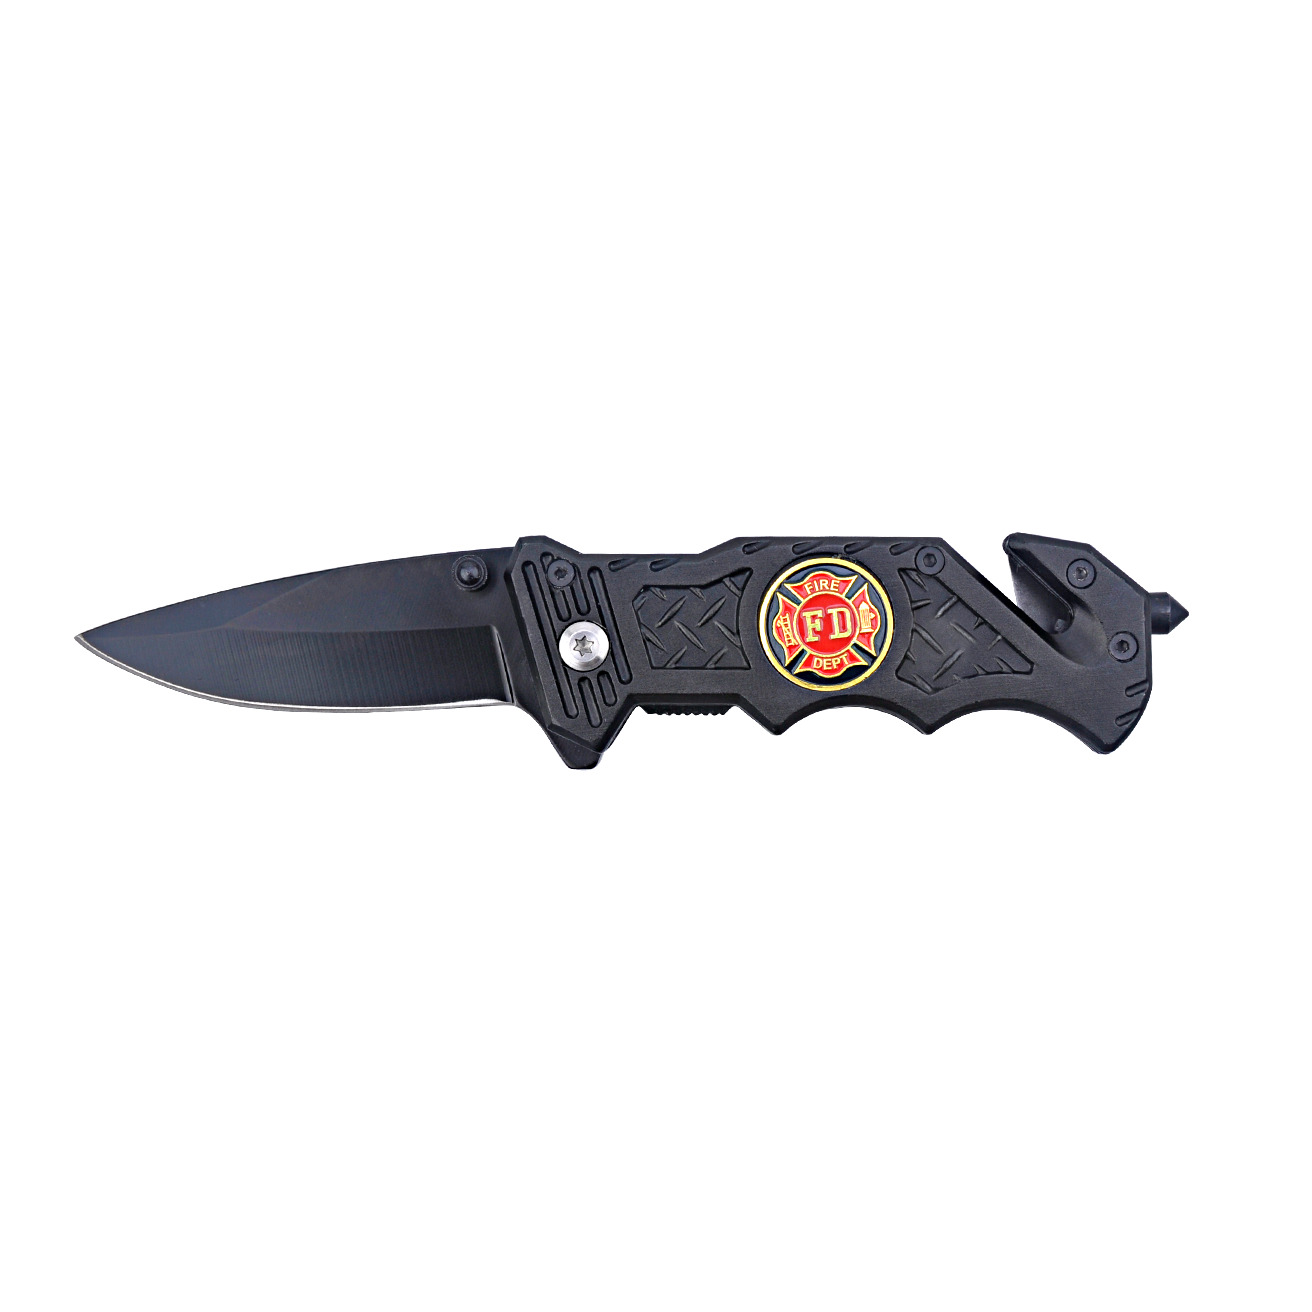 Personalized Firefighter Survival Knife w/ Fire Fighter Emblem